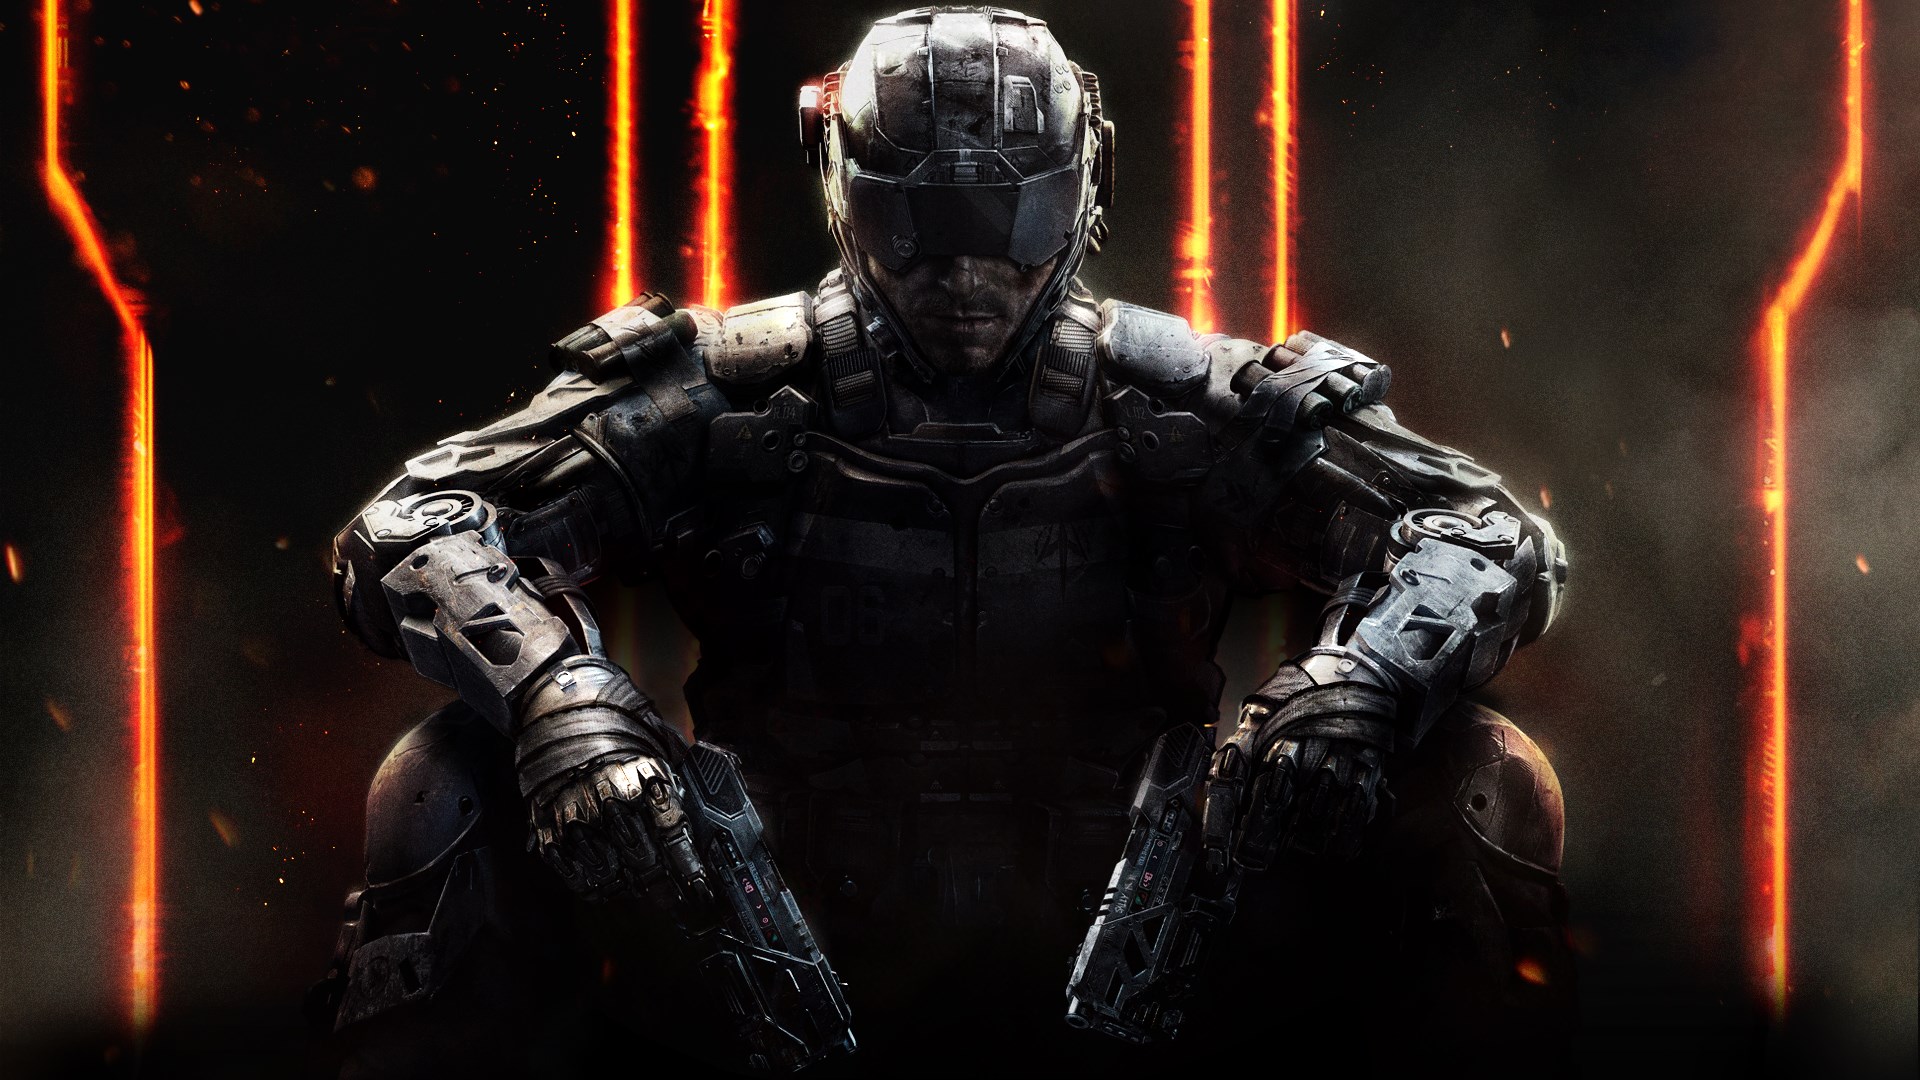 black ops 3 xbox store